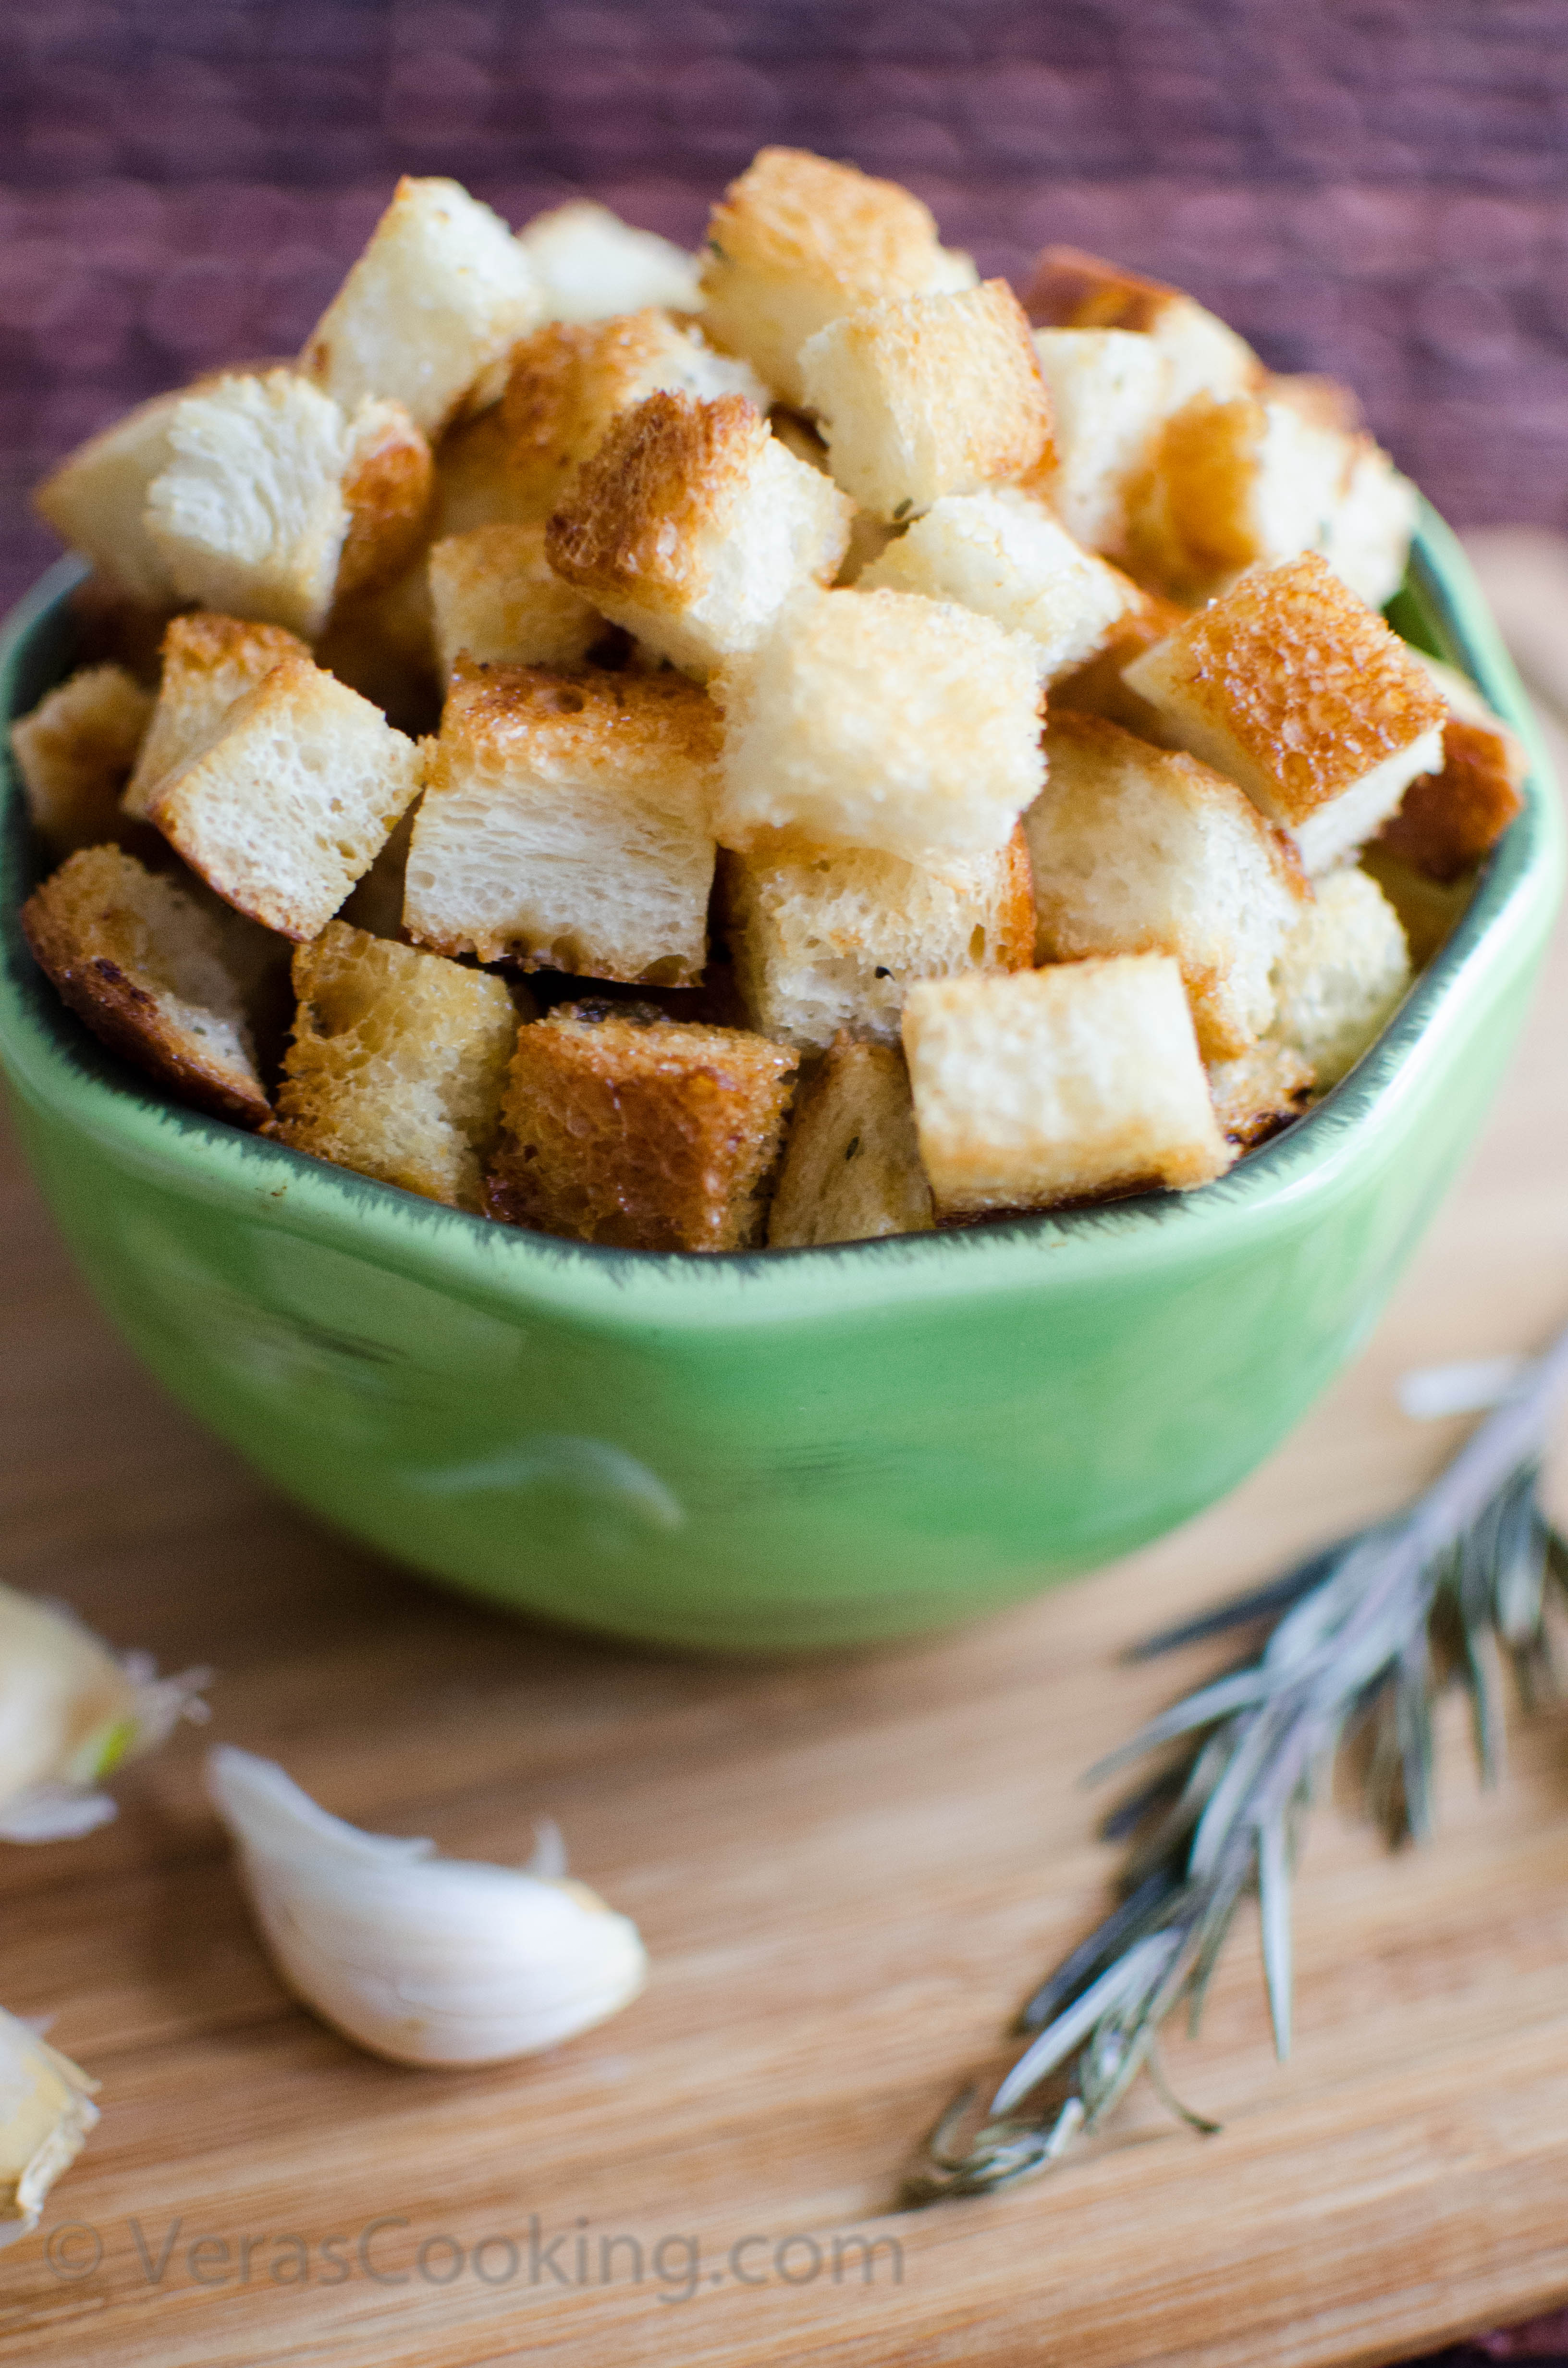 HOMEMADE CROUTONS - Vera&amp;#39;s Cooking